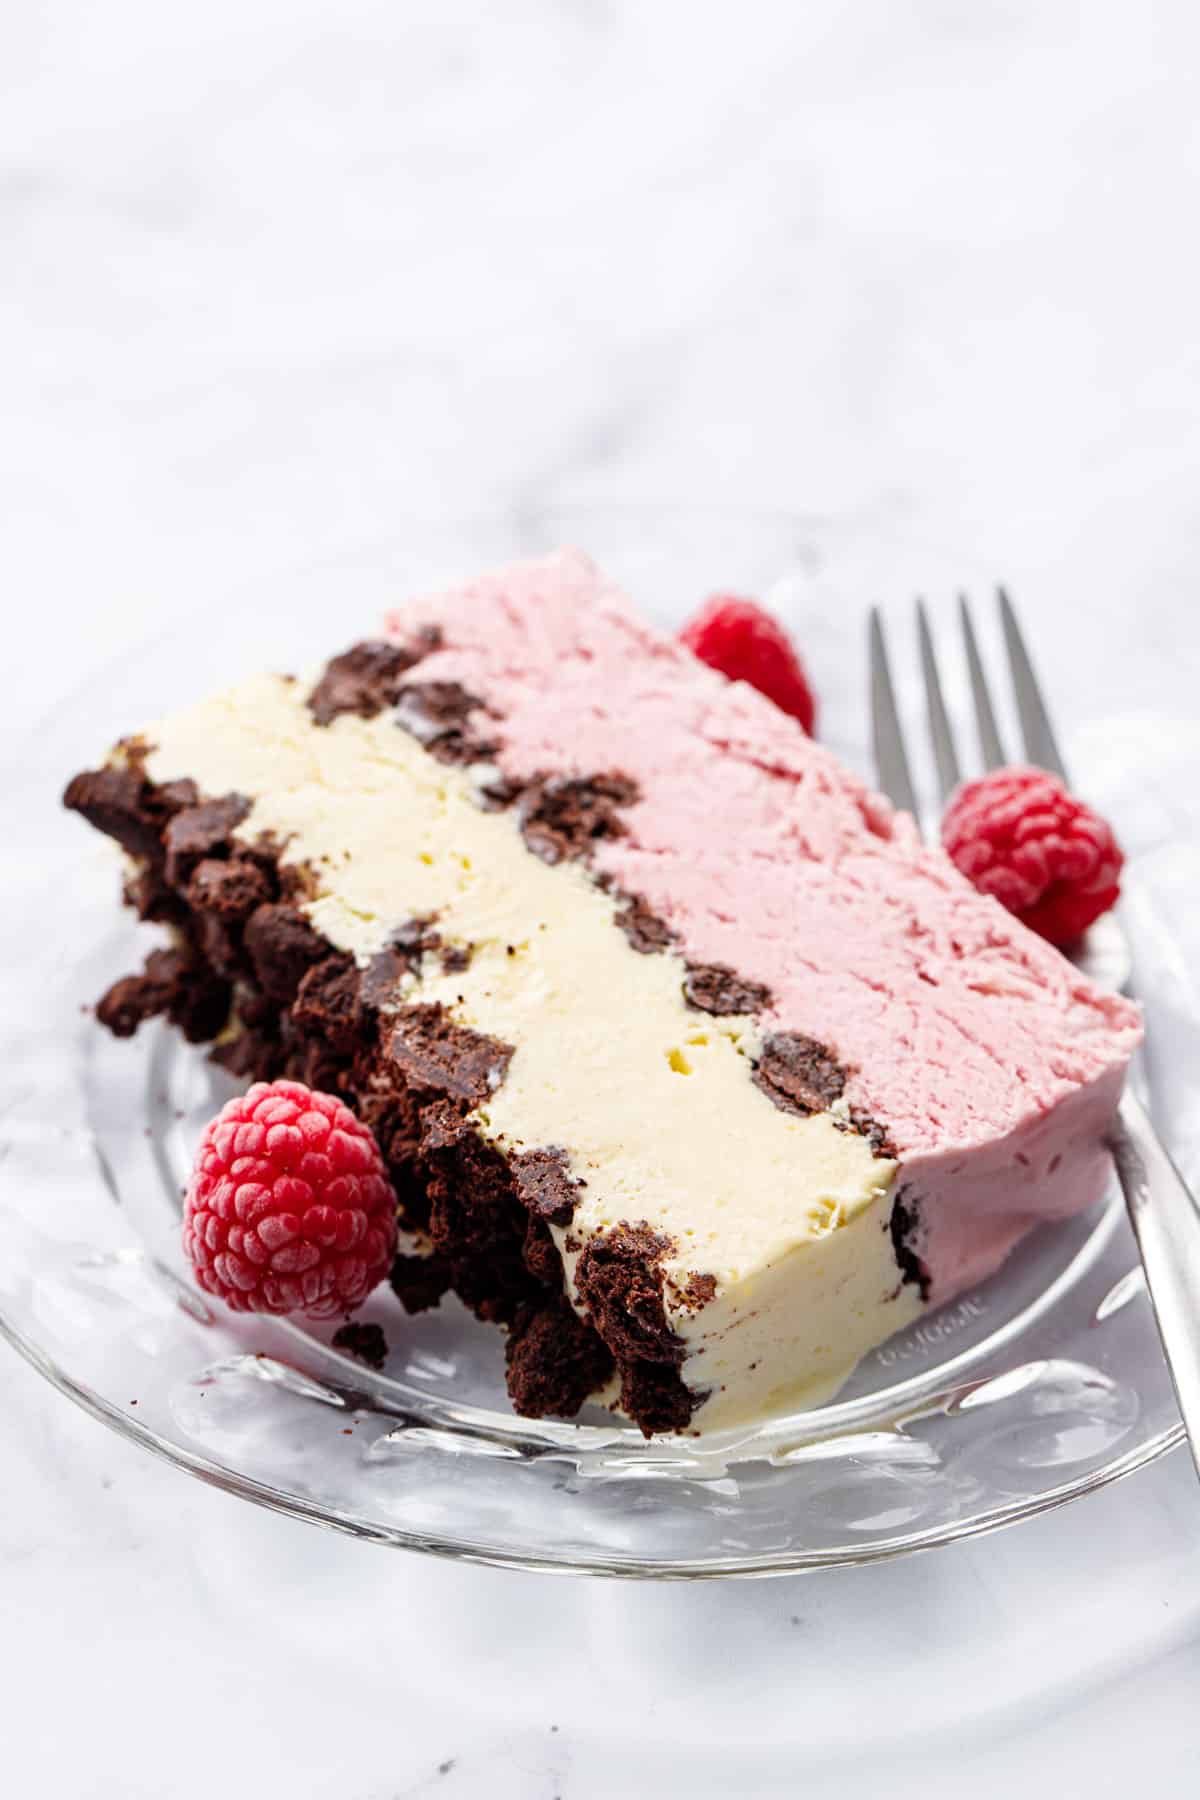 Closeup texture shot of a slice of Raspberry & Passionfruit Semifreddo with Chocolate Crumbs on a glass plate with fork and frozen raspberries.